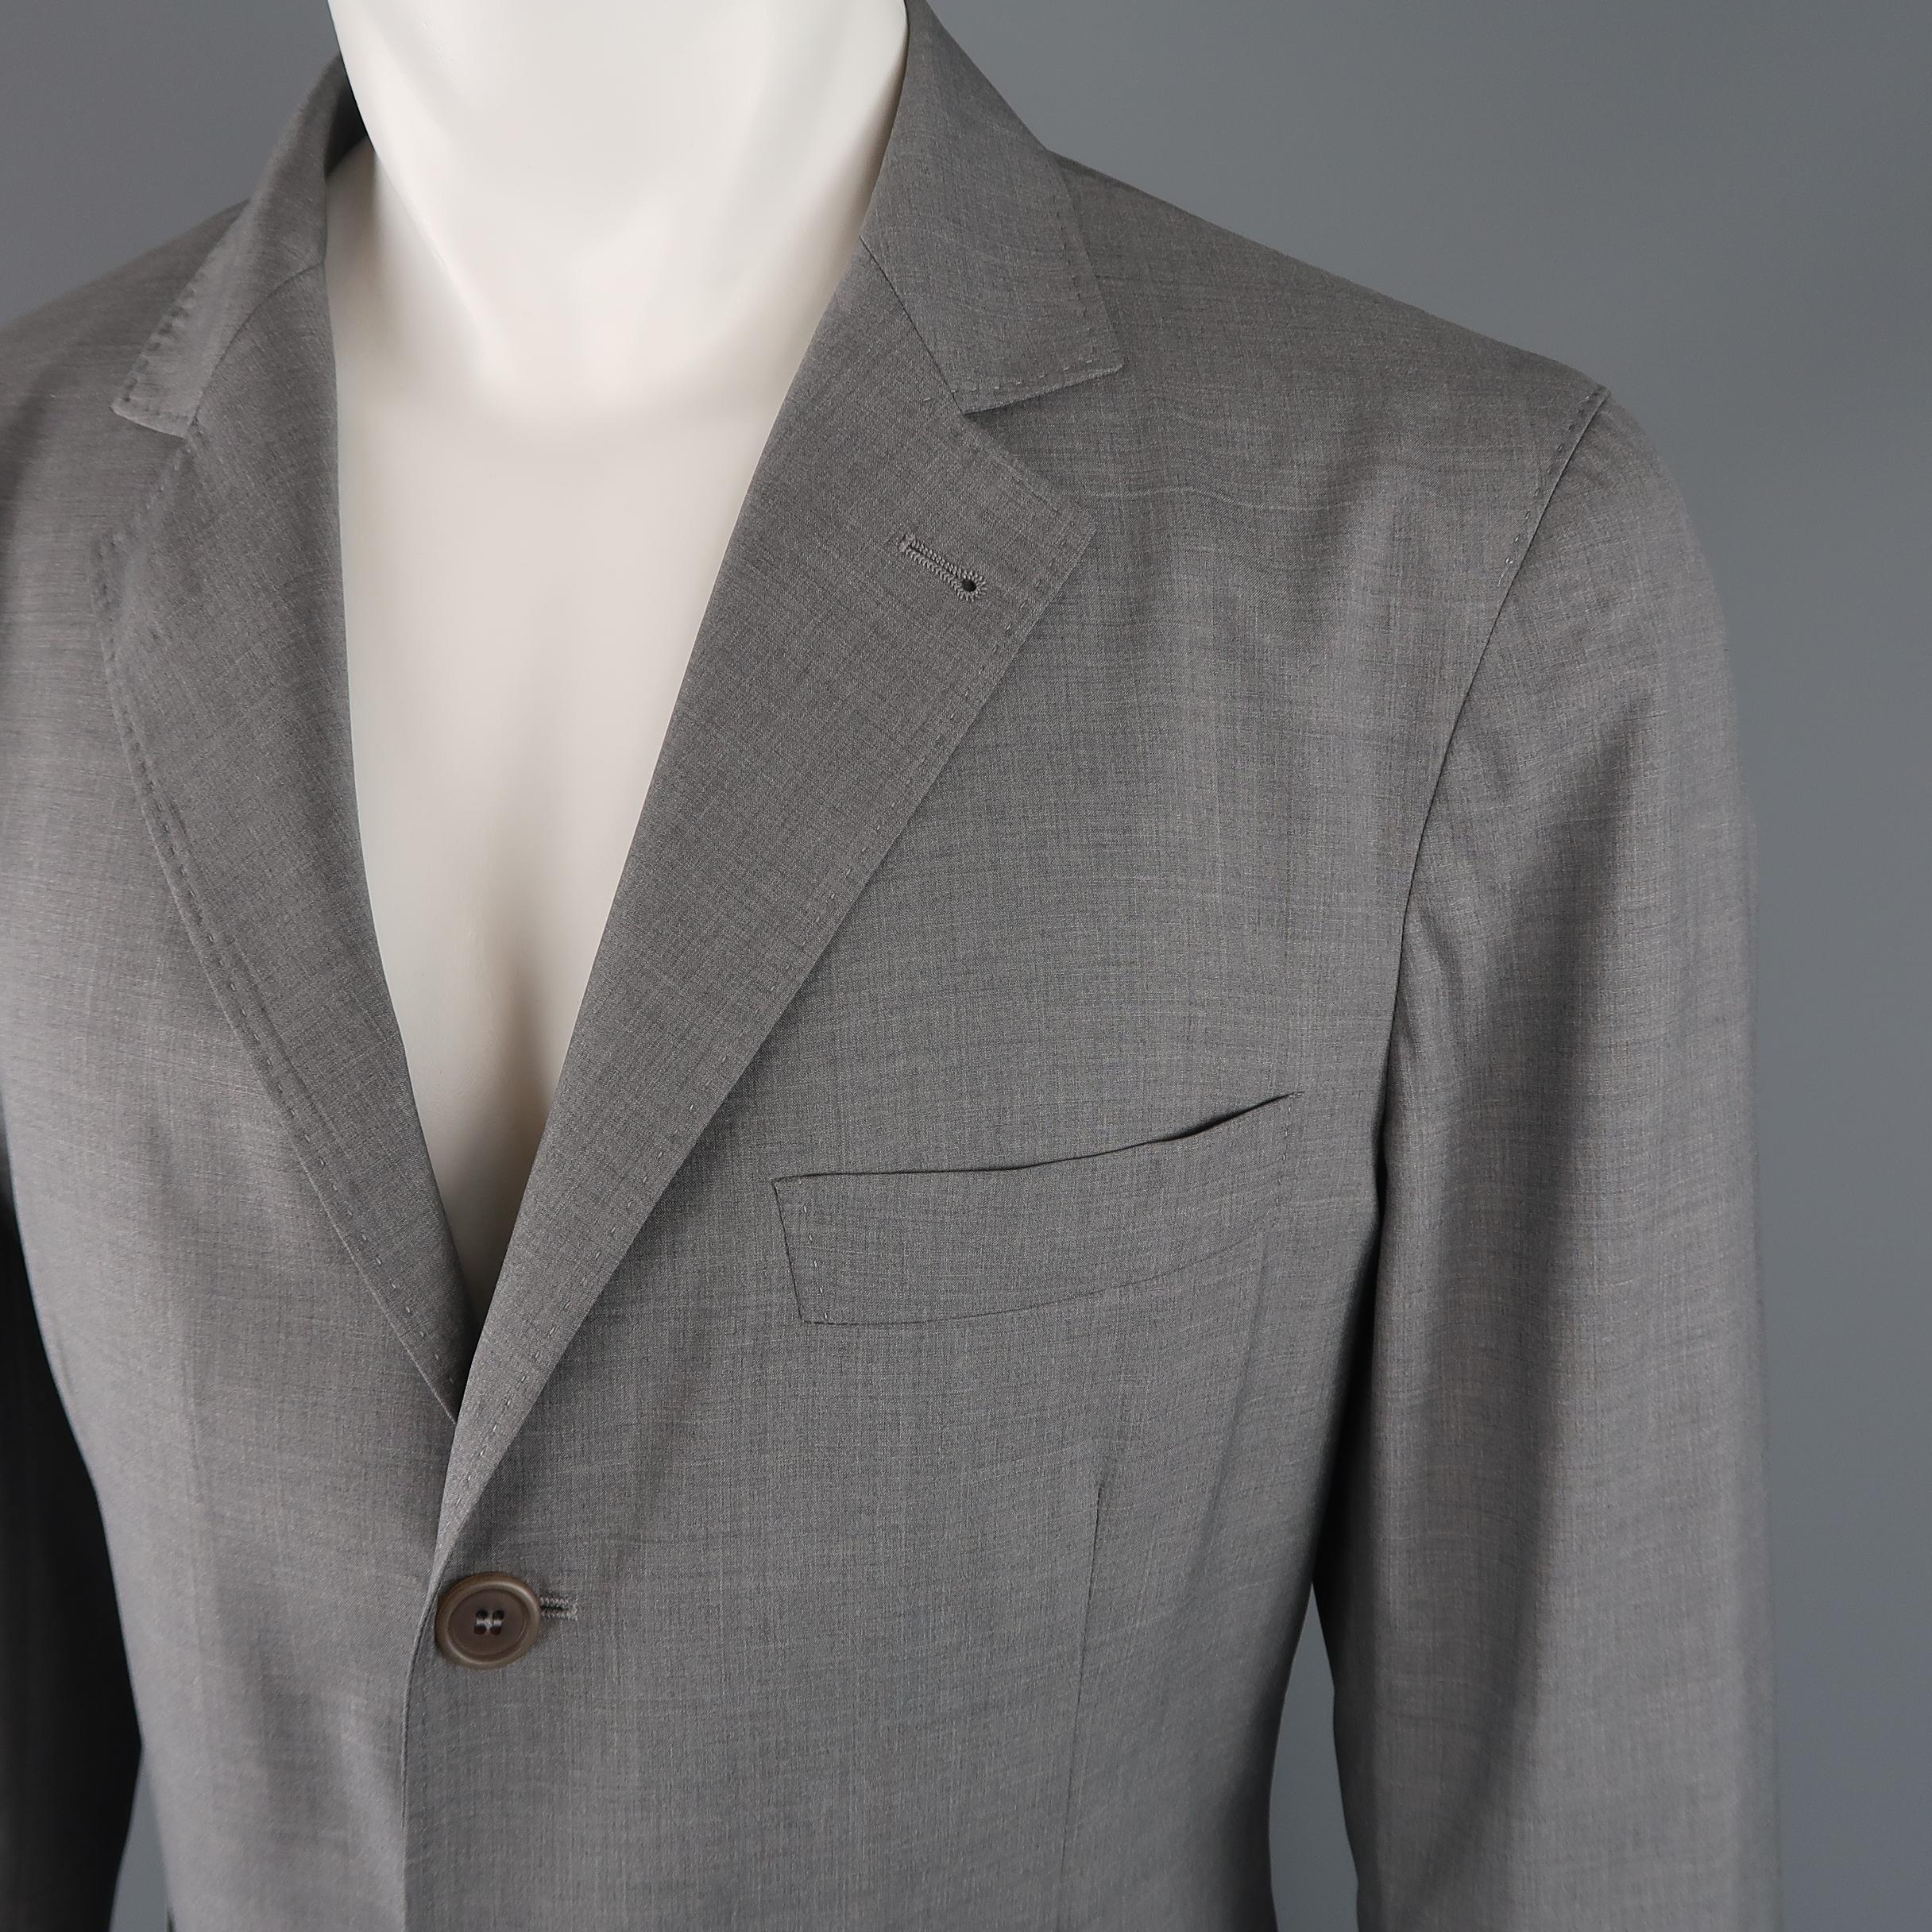 BRUNELLO CUCINELLI single breasted sport coat comes in a light weight wool silk blend fabric with a notch lapel, three button front, triple pockets and half liner. Stain and broken button on cuff. As-is. Made in Italy.

Retail: $2500.00 
Good